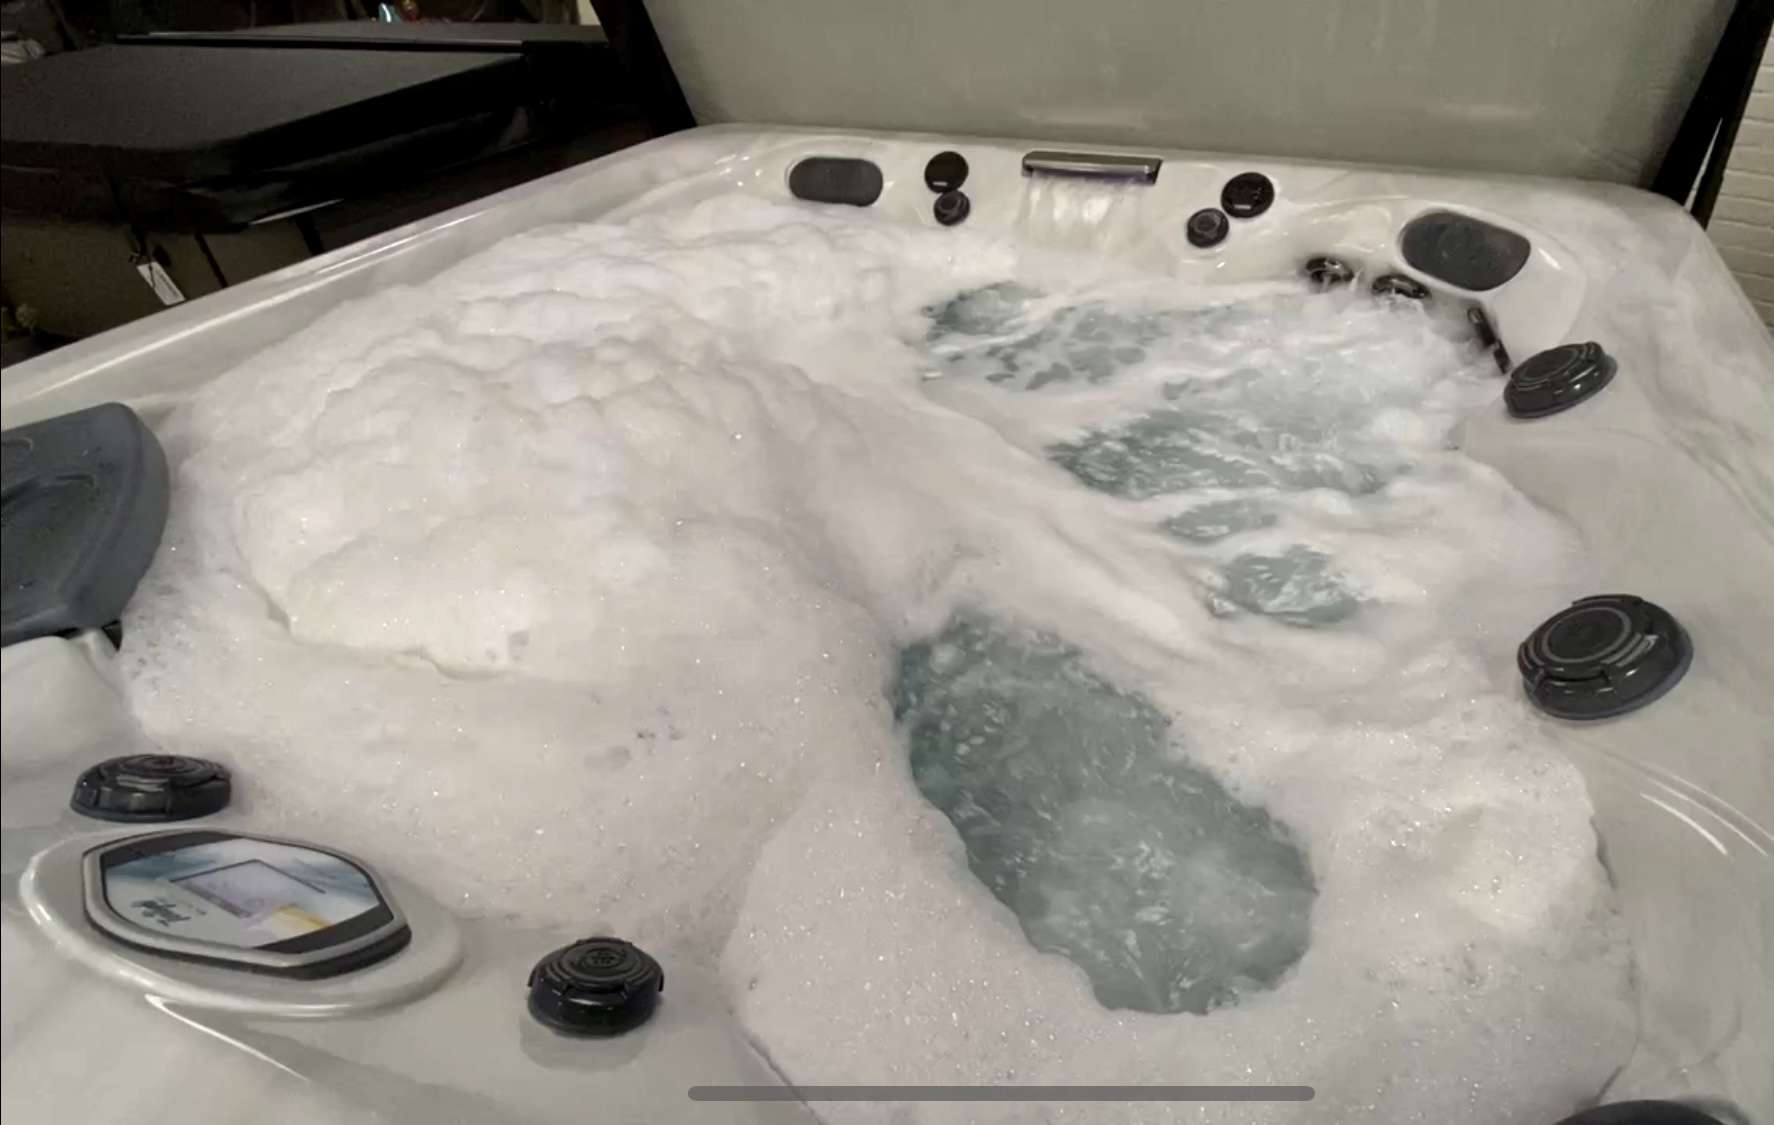 How to get rid of hot tub foam